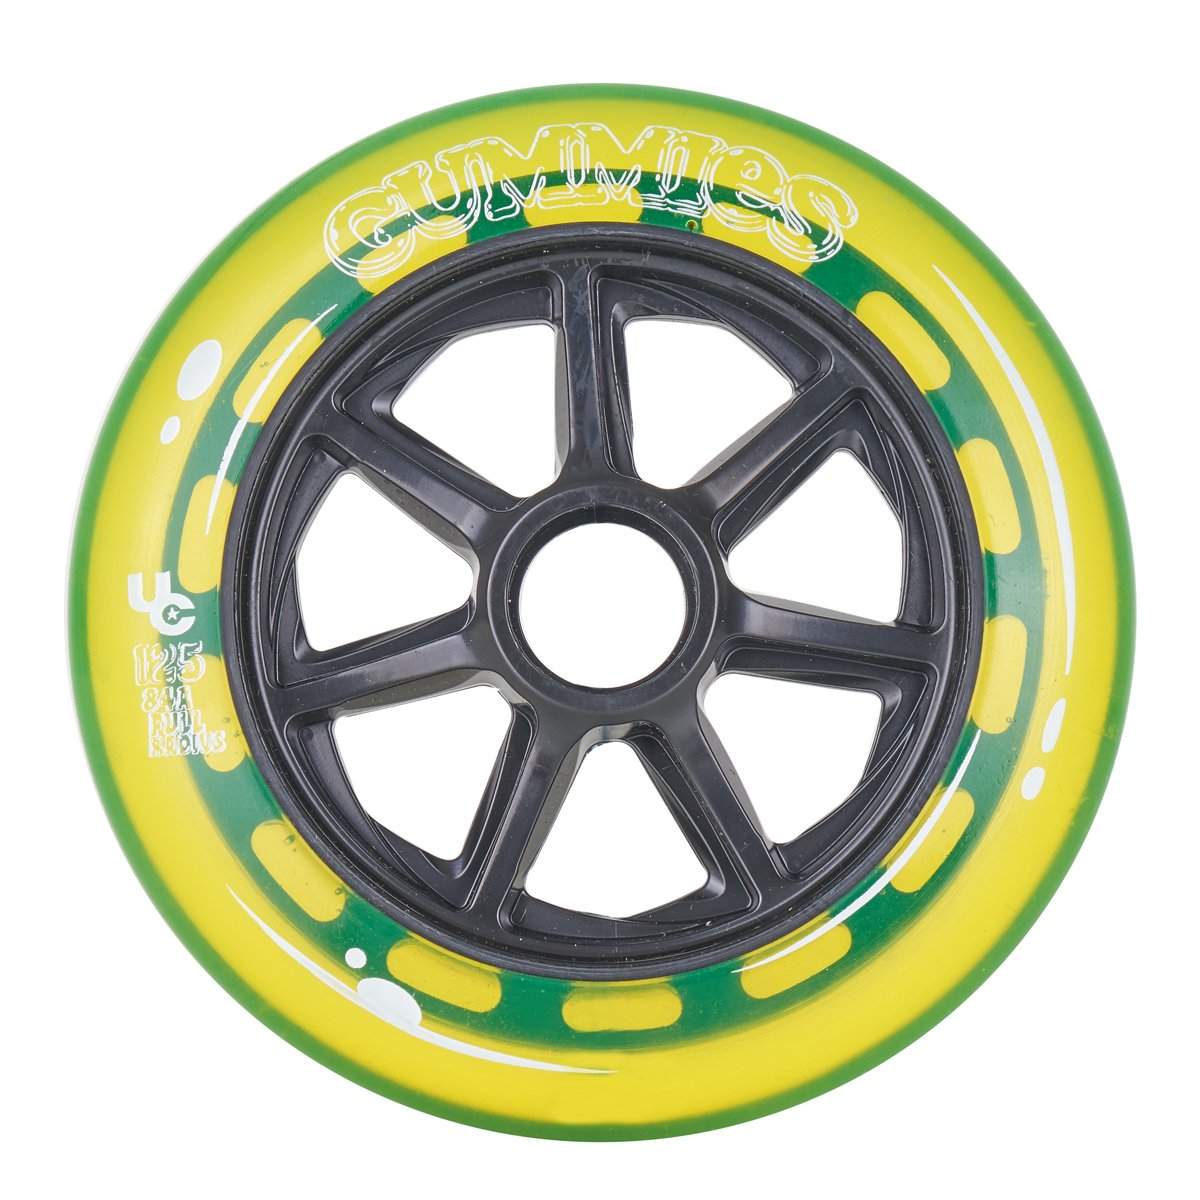 Undercover Gummies Wheels 125mm 84a - Yellow - Sold Individually-Undercover Wheels-125mm,atcUpsellCol:upsellwheels,yellow